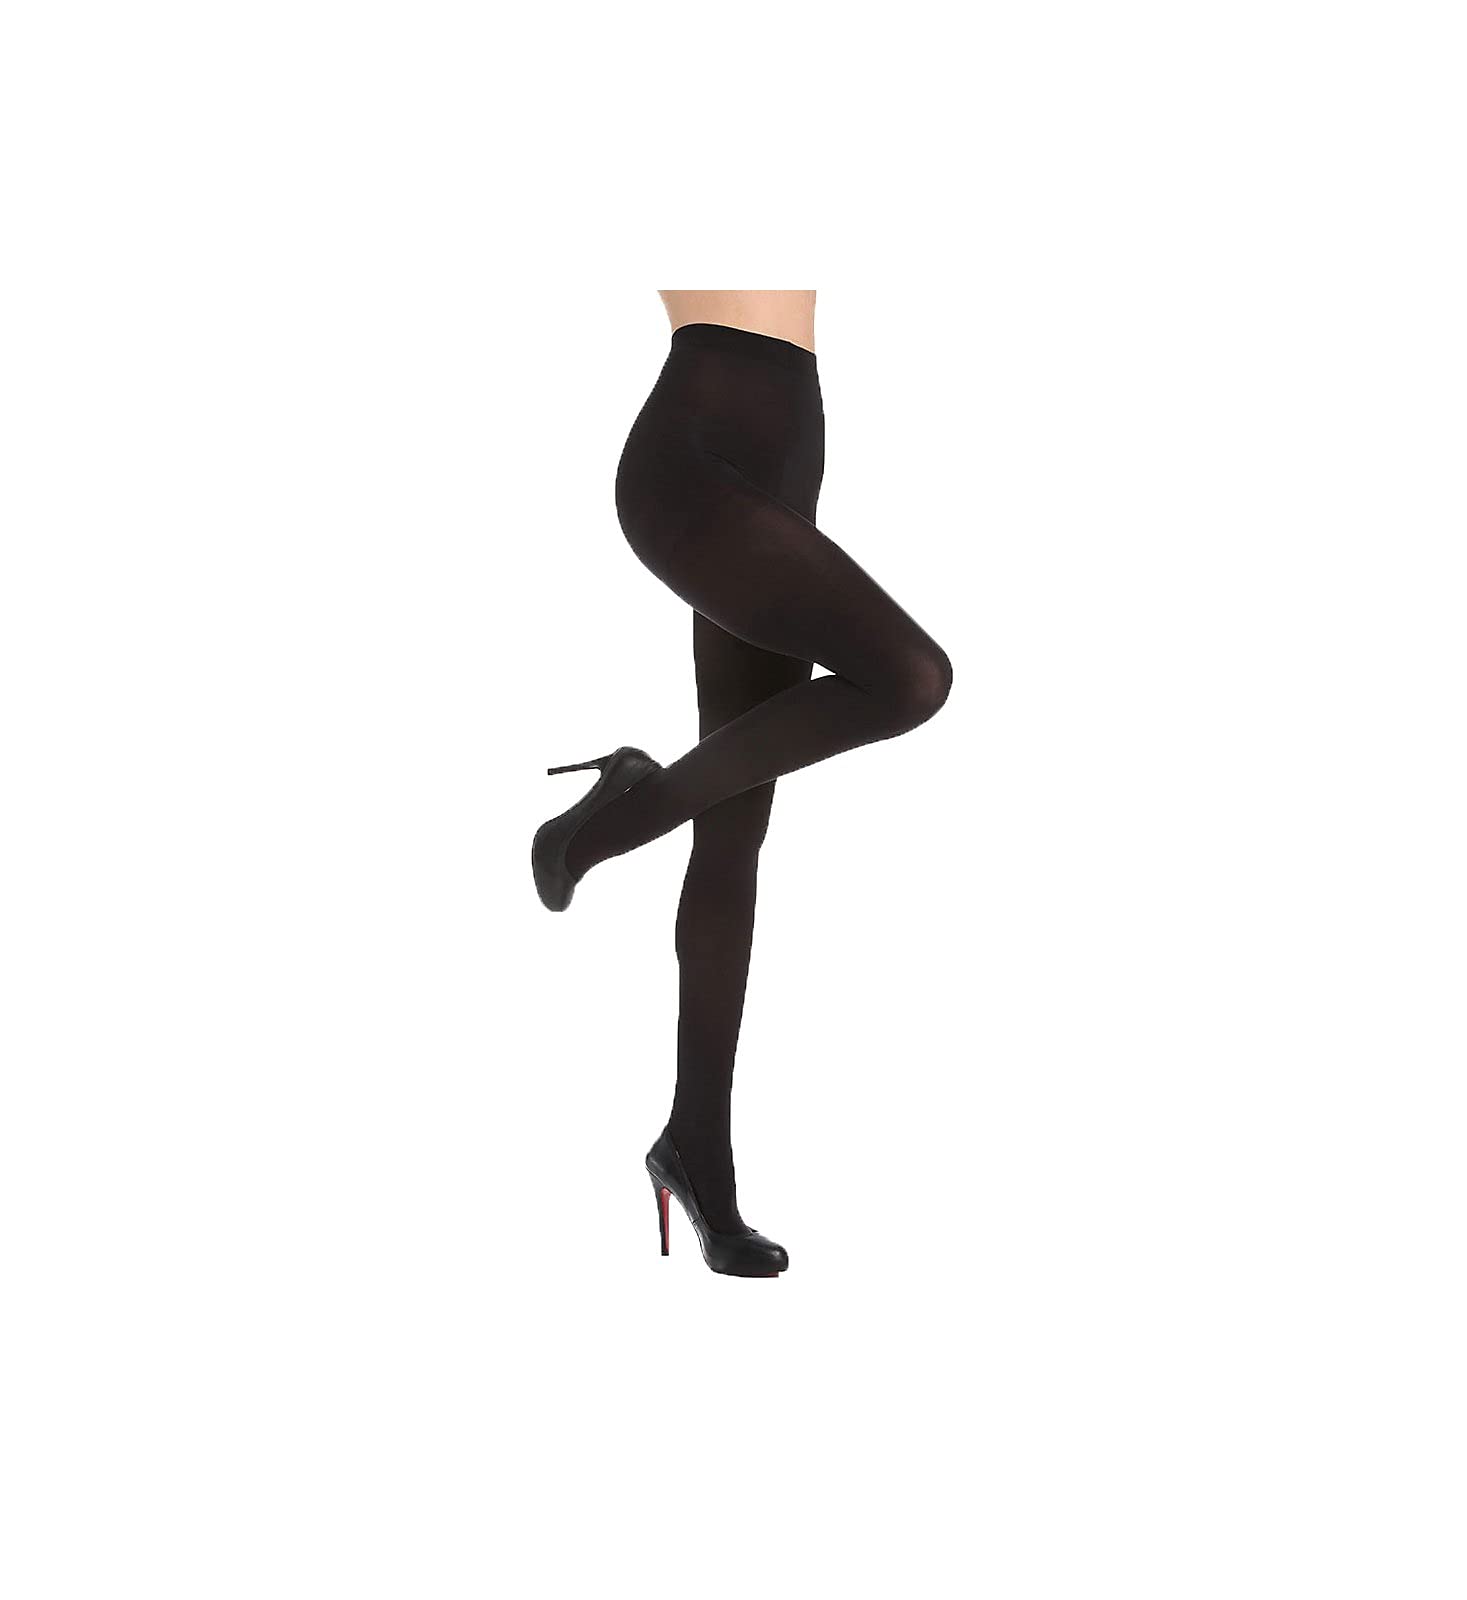 HUE Super Opaque Tights with Control Top